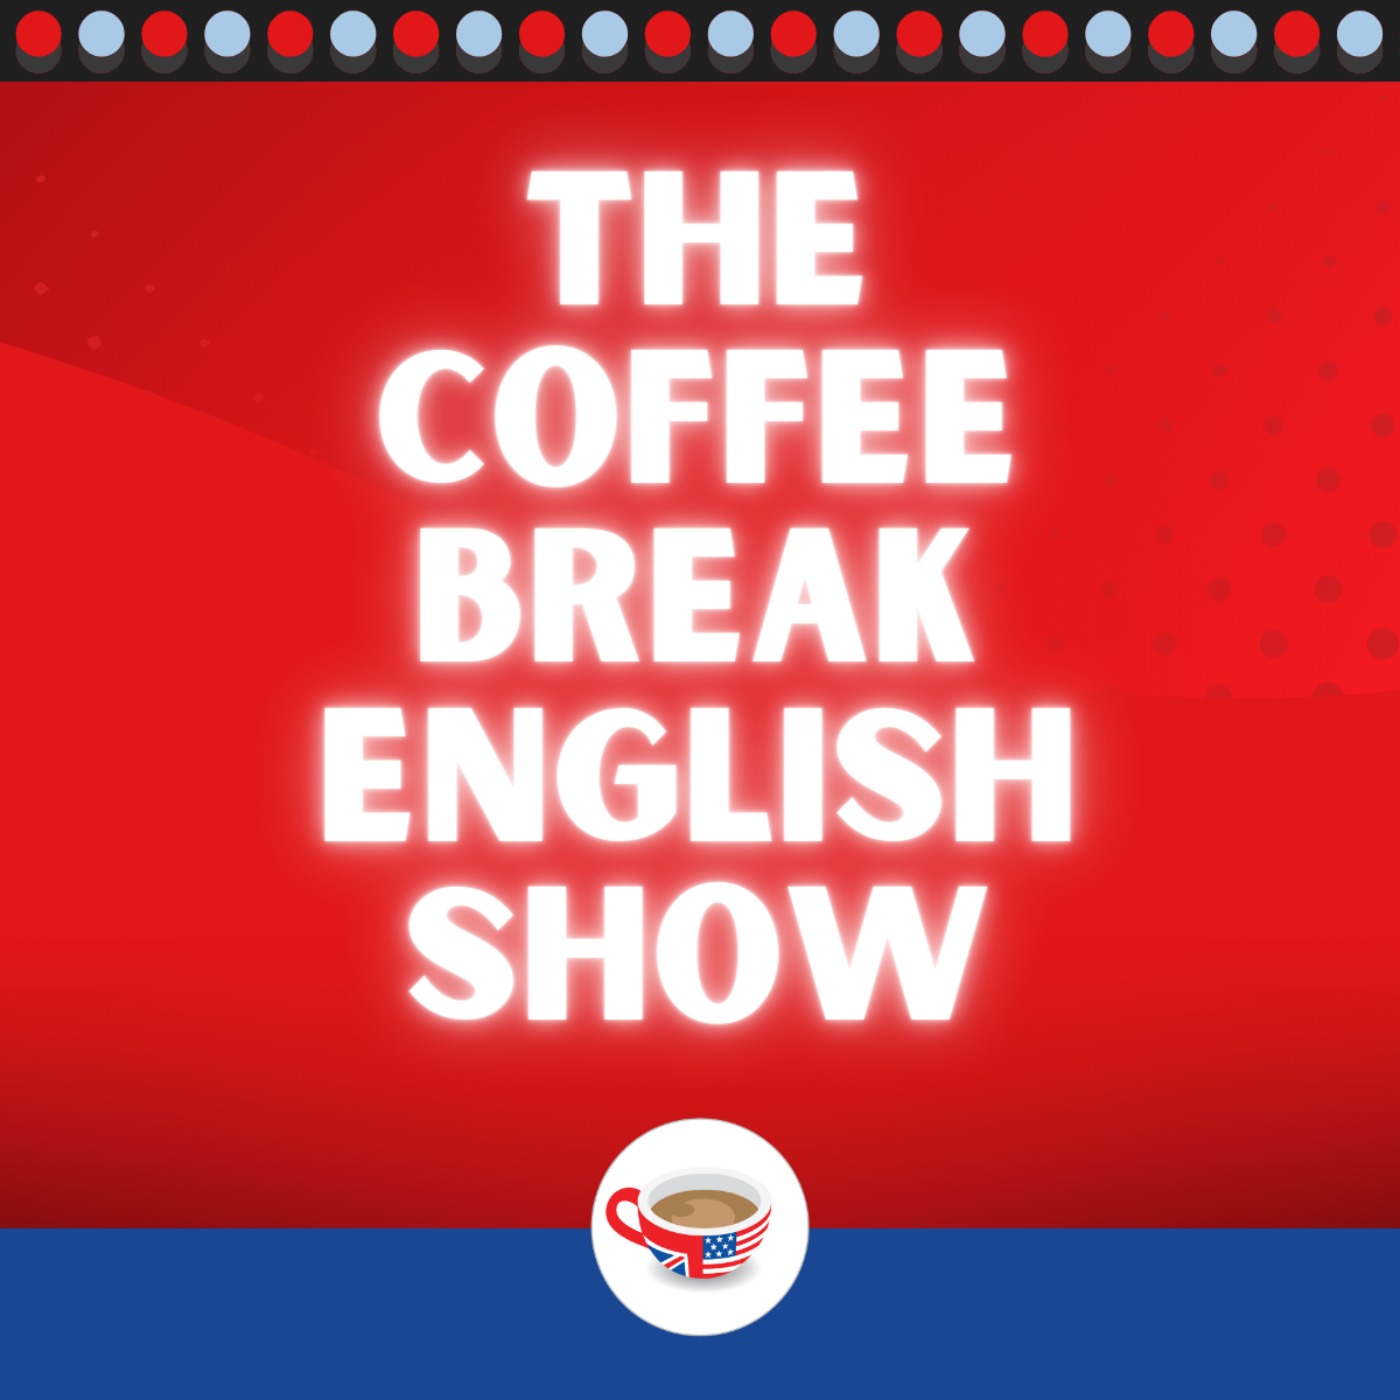 How to pronounce 'eat' and 'it' | The Coffee Break English Show 1.04